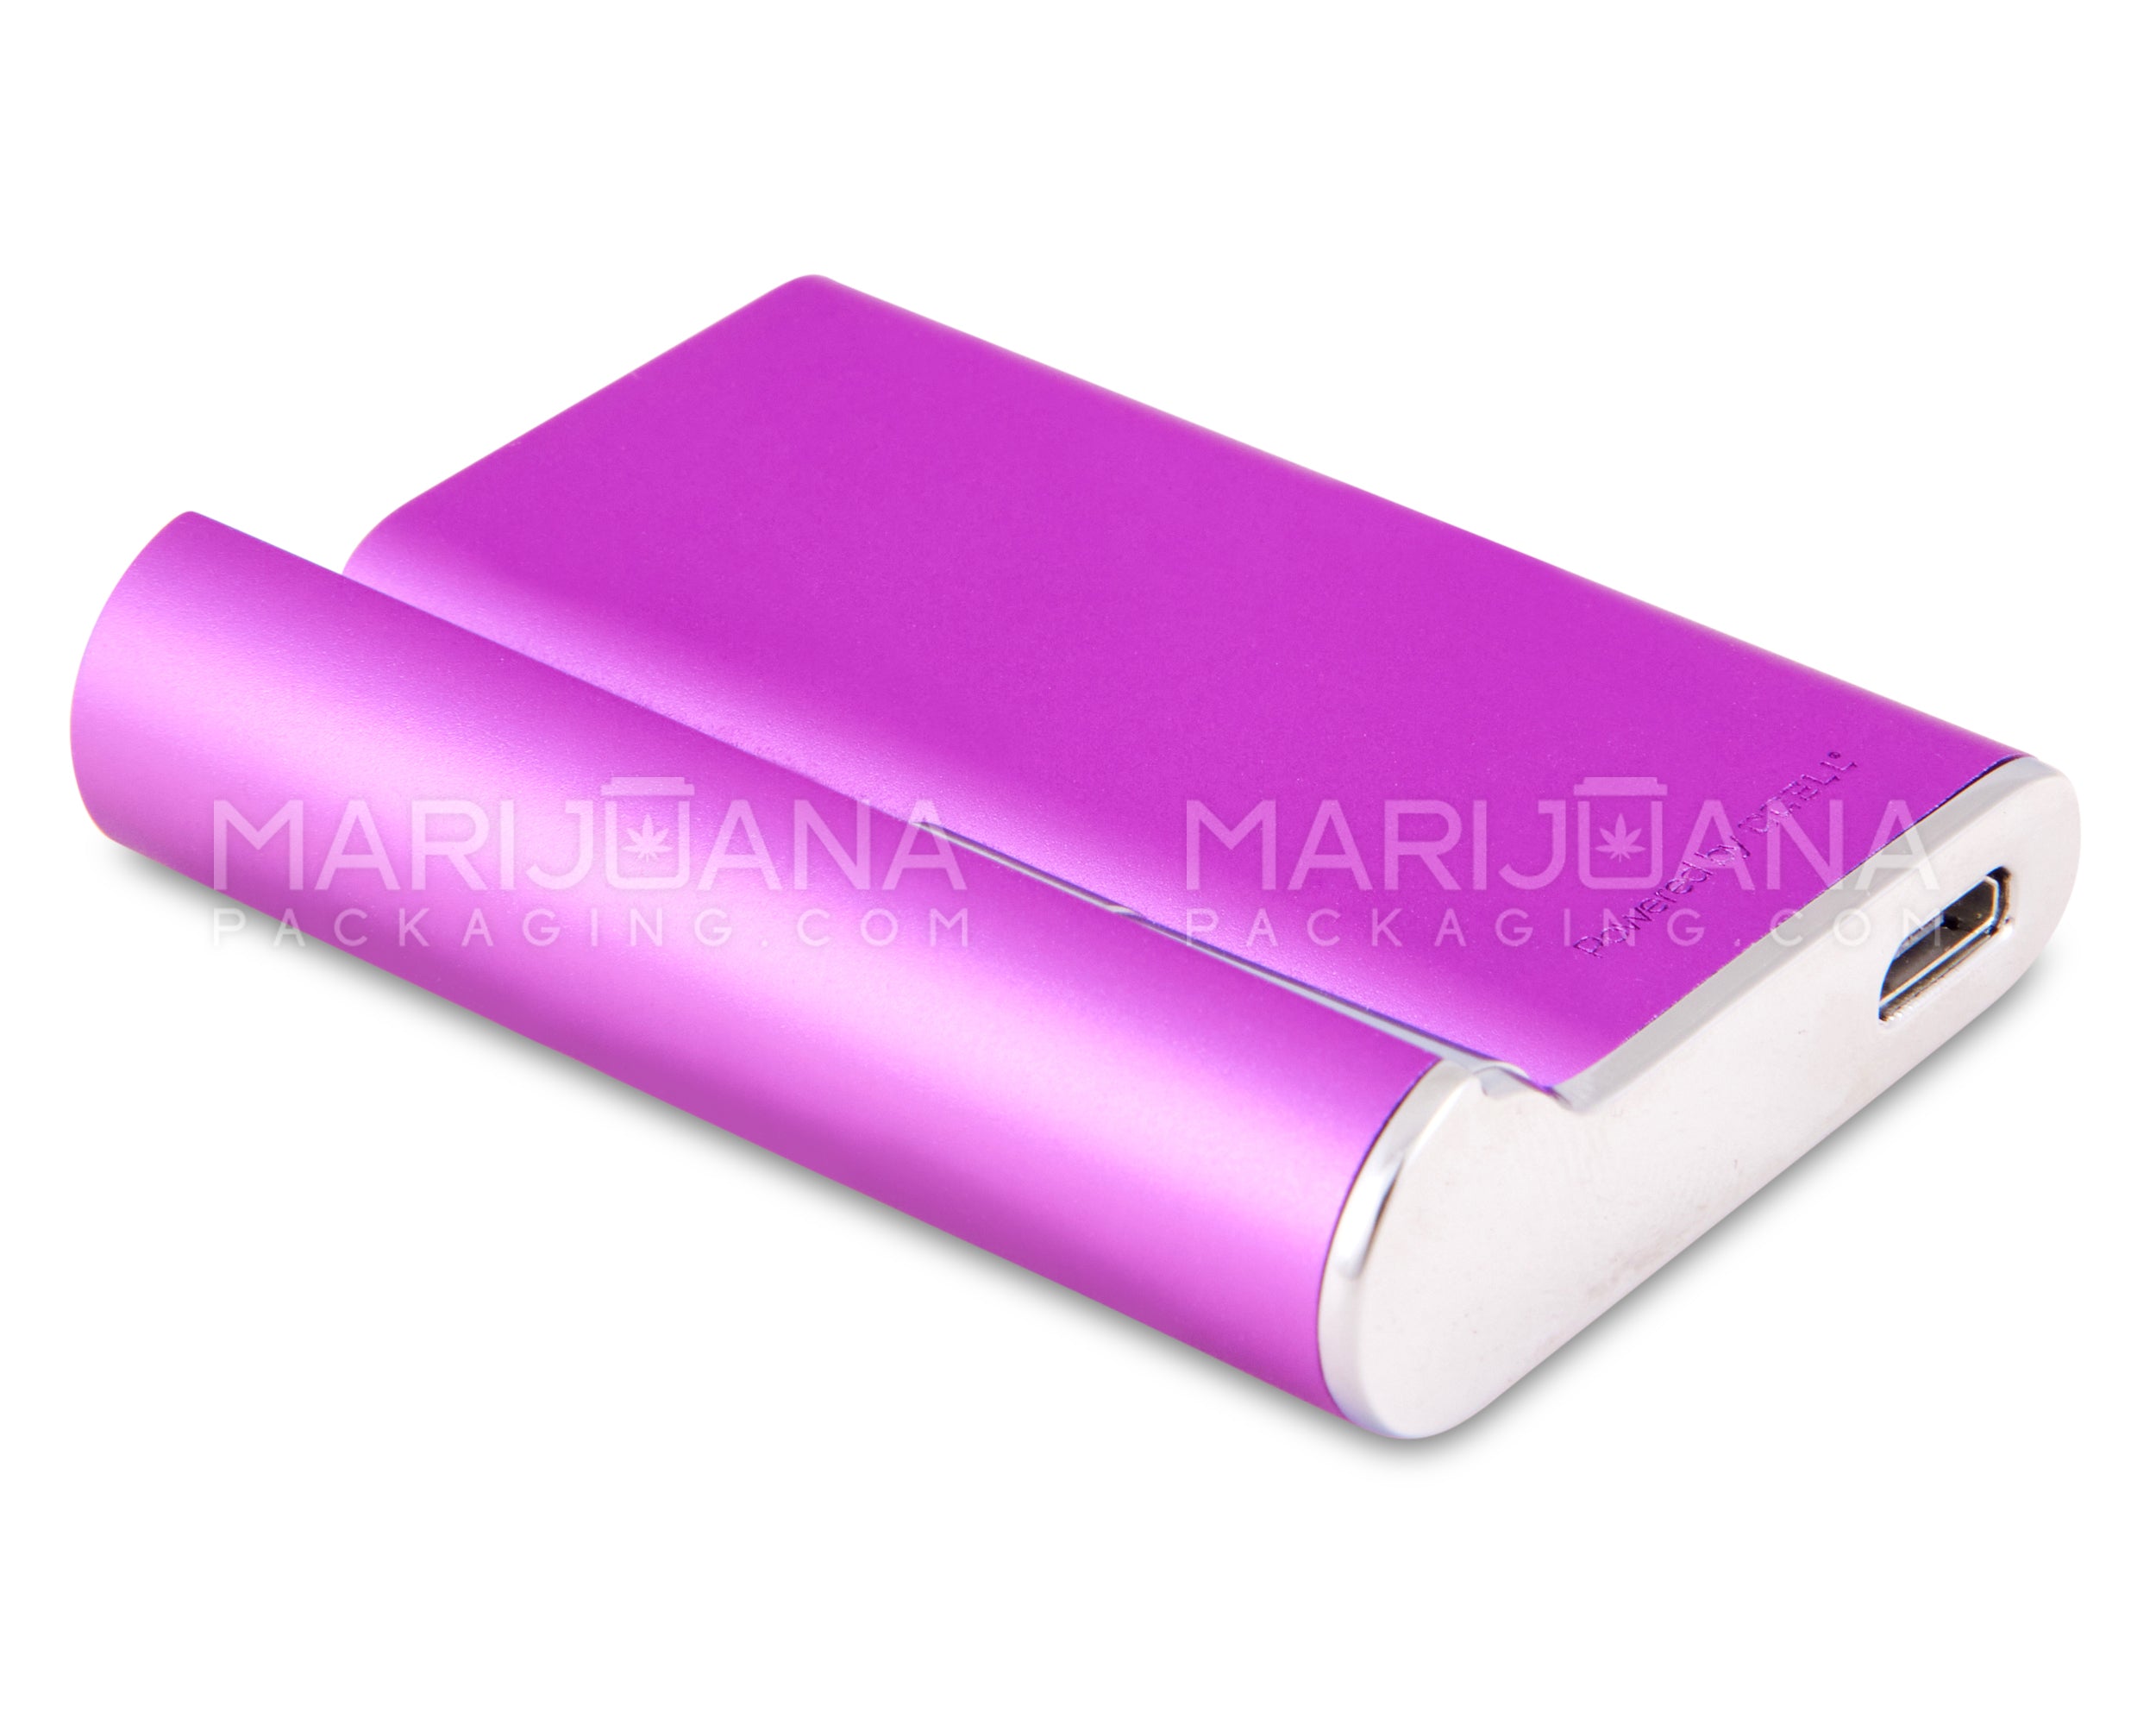 510 Thread Battery - Buy Online Now - Plant Puff™